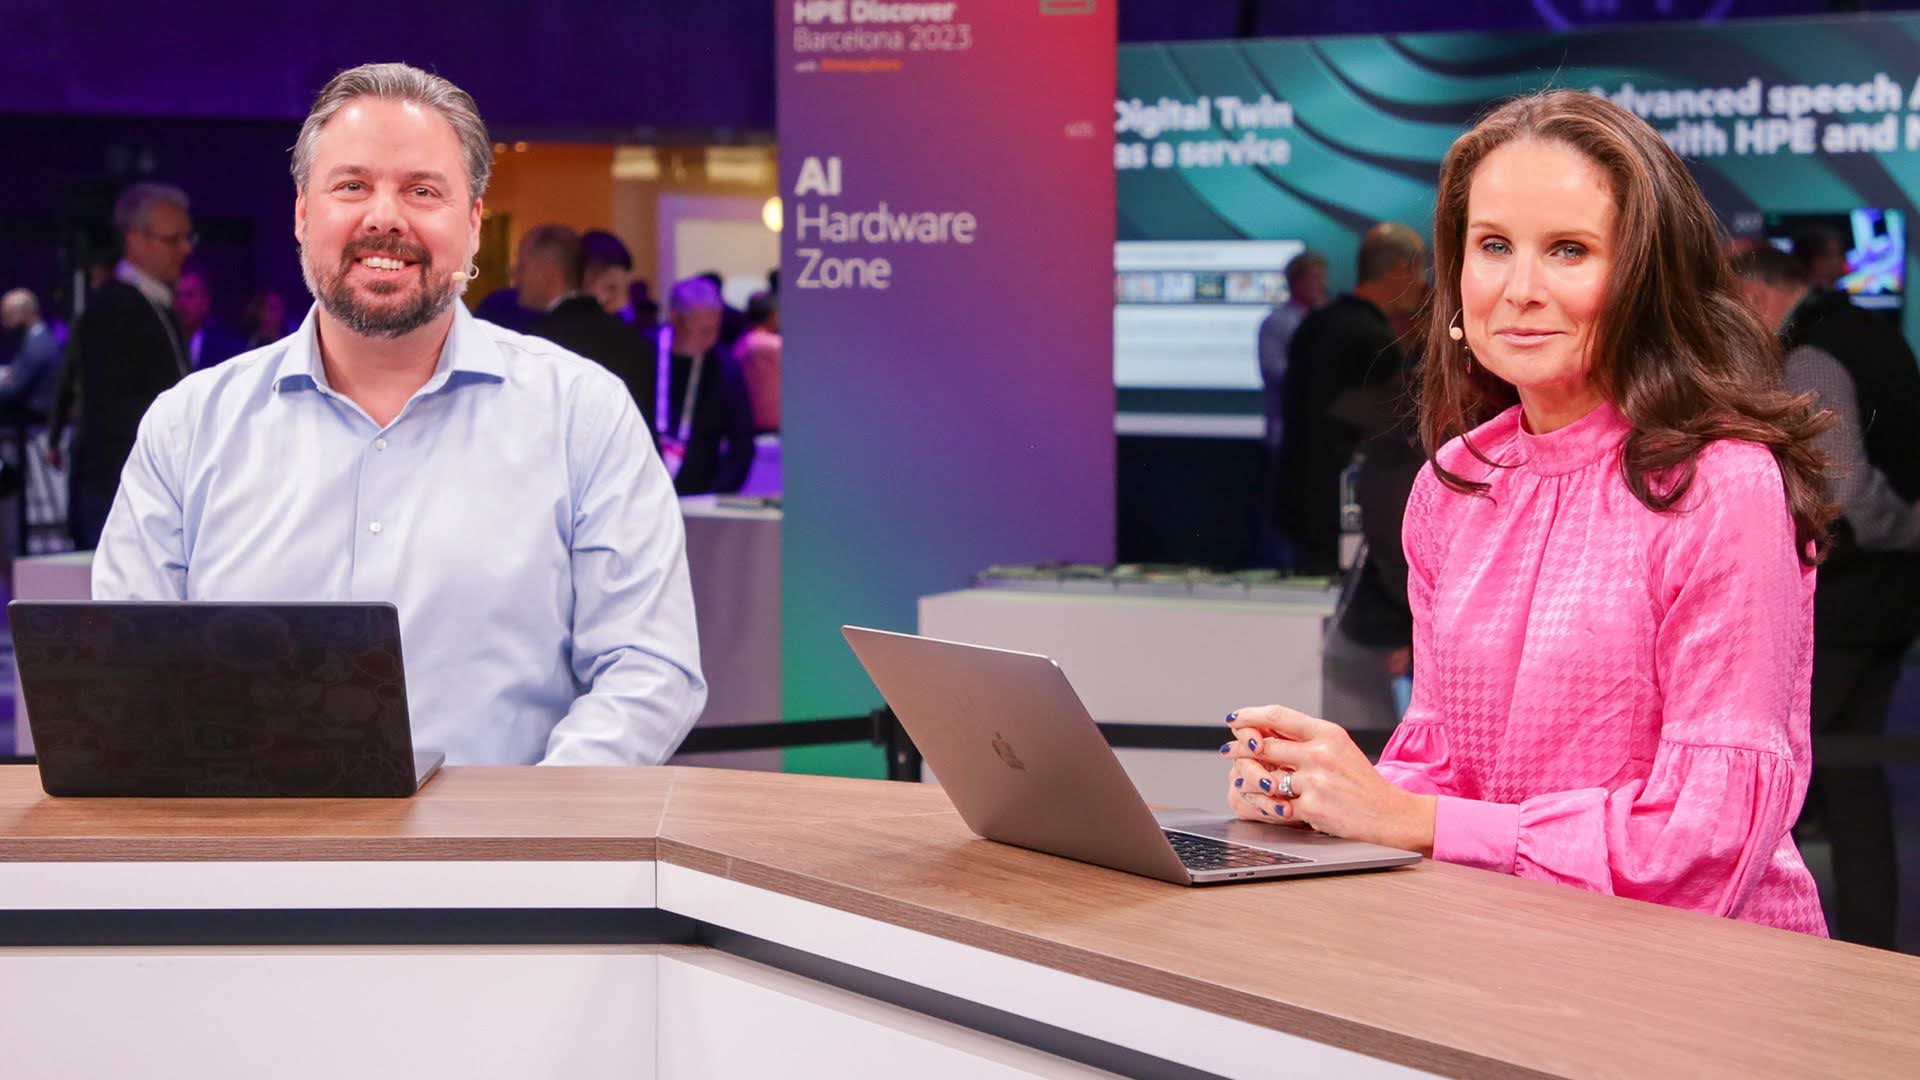 Three insights you might have missed from the ‘HPE Discover Barcelona